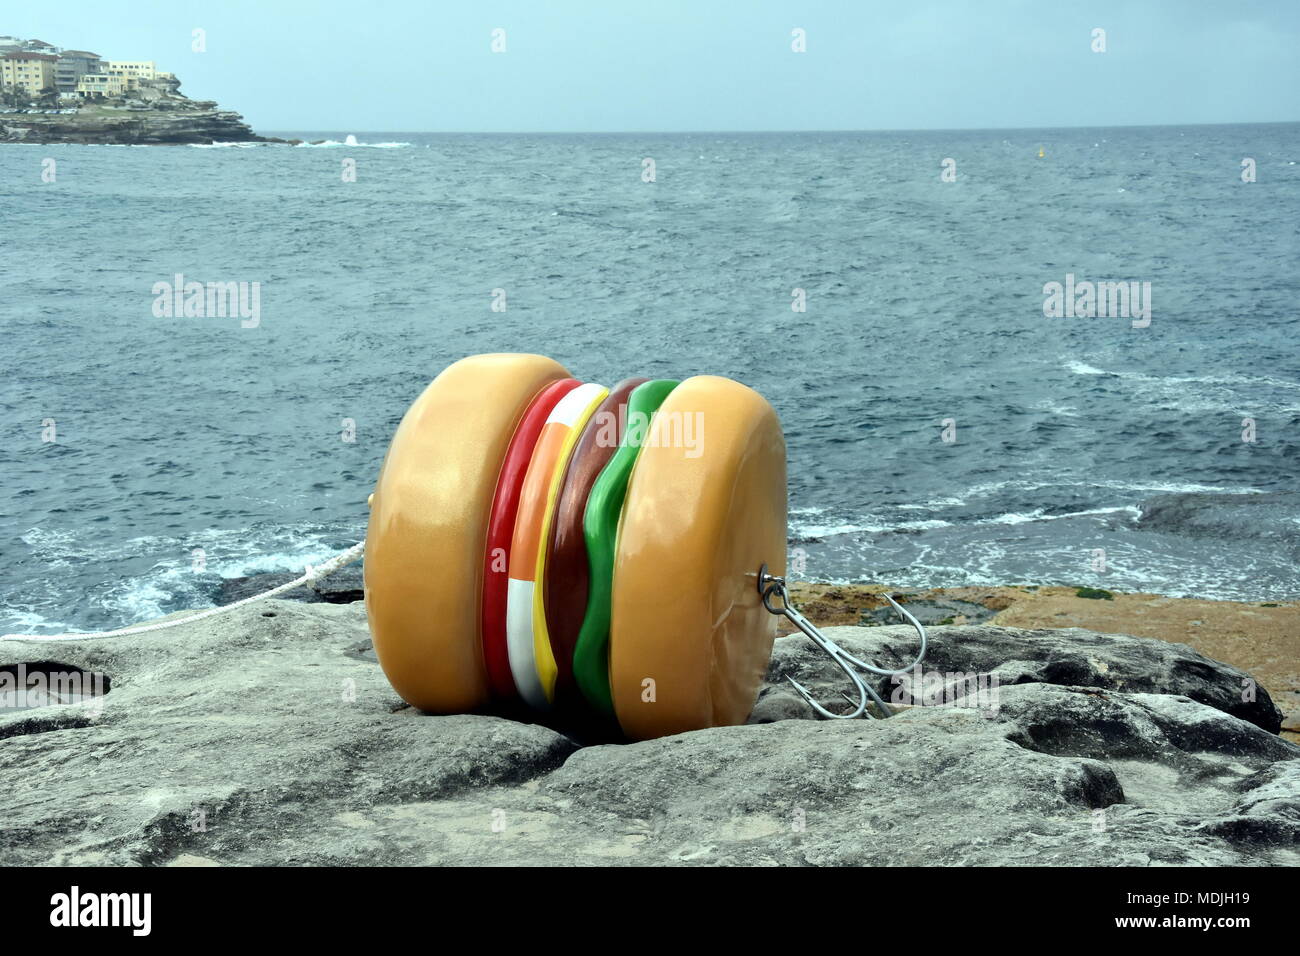 Sydney, Australia - Oct 27, 2017. James Dive: What a Tasty Looking Burger. Sculpture by the Sea along the Bondi to Coogee coastal walk is the world's  Stock Photo